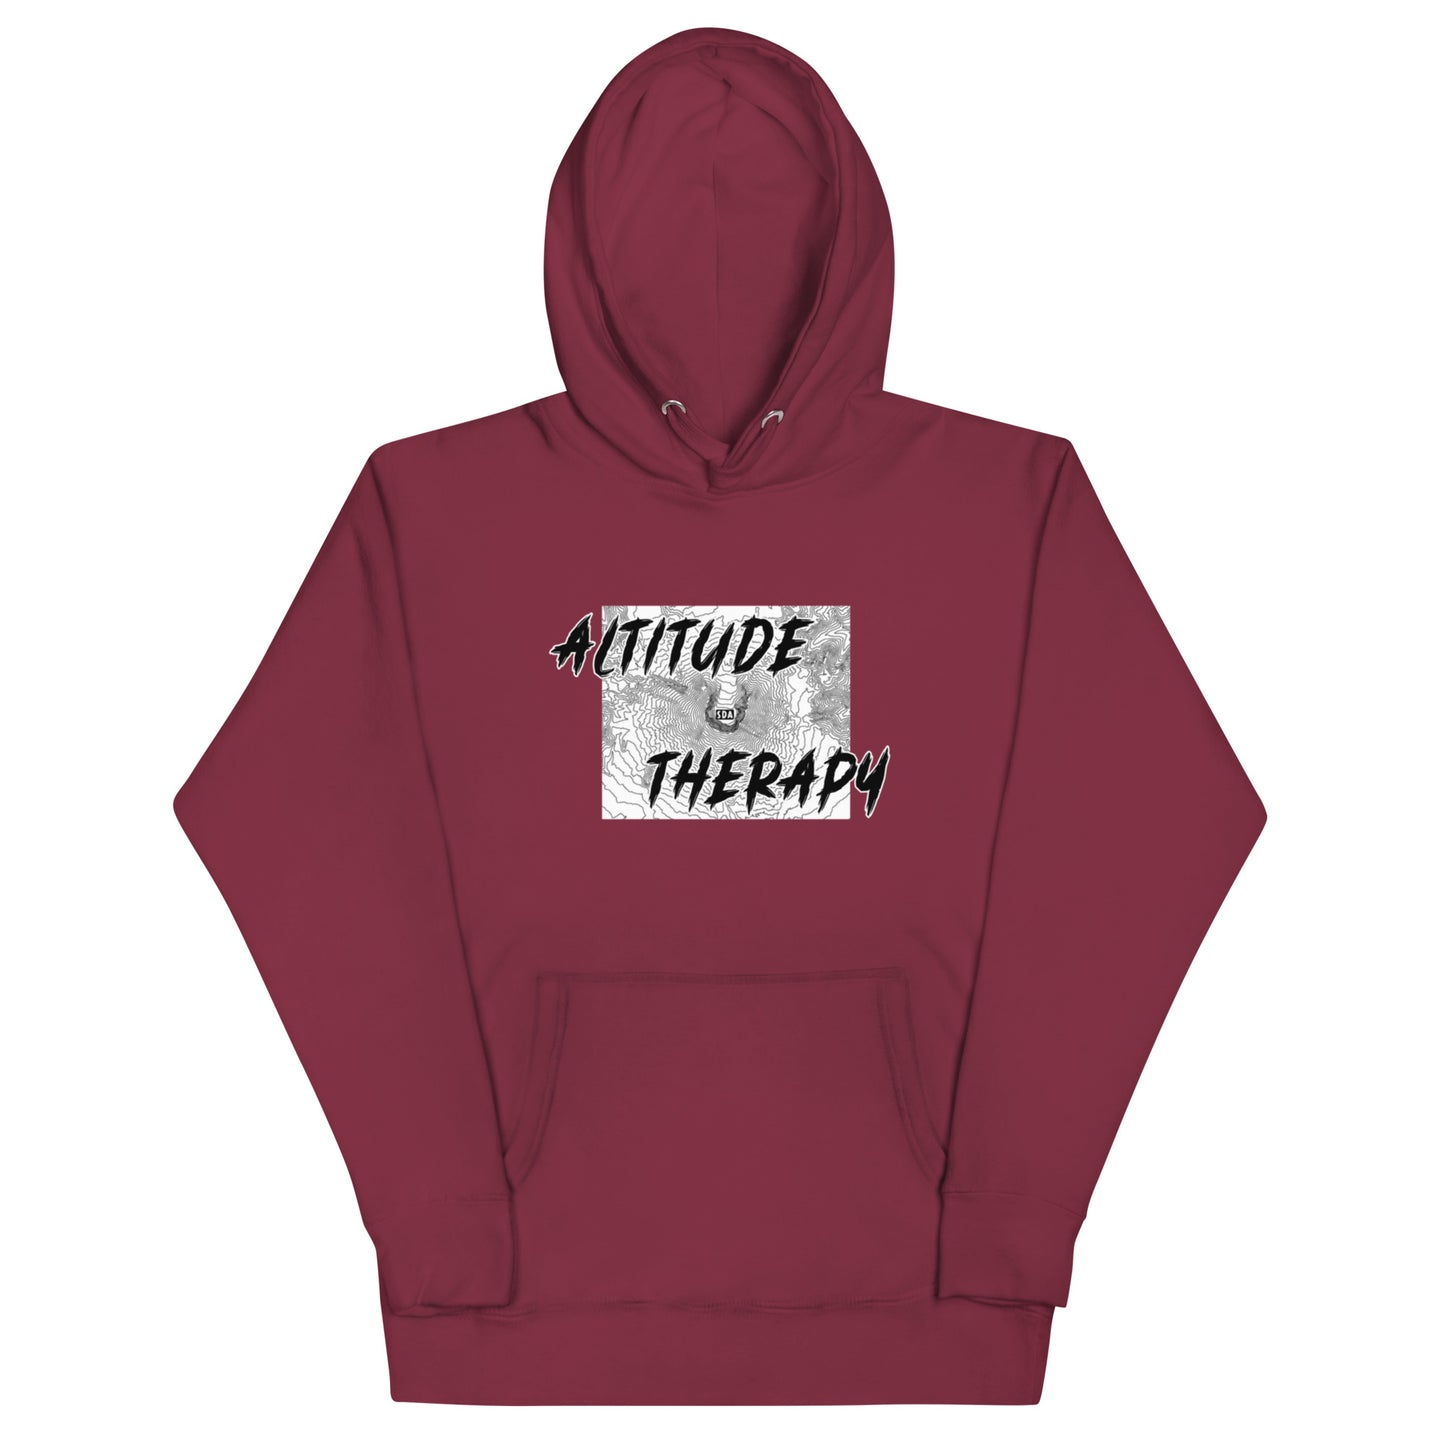 ALTITUDE THERAPY Unisex Hoodie